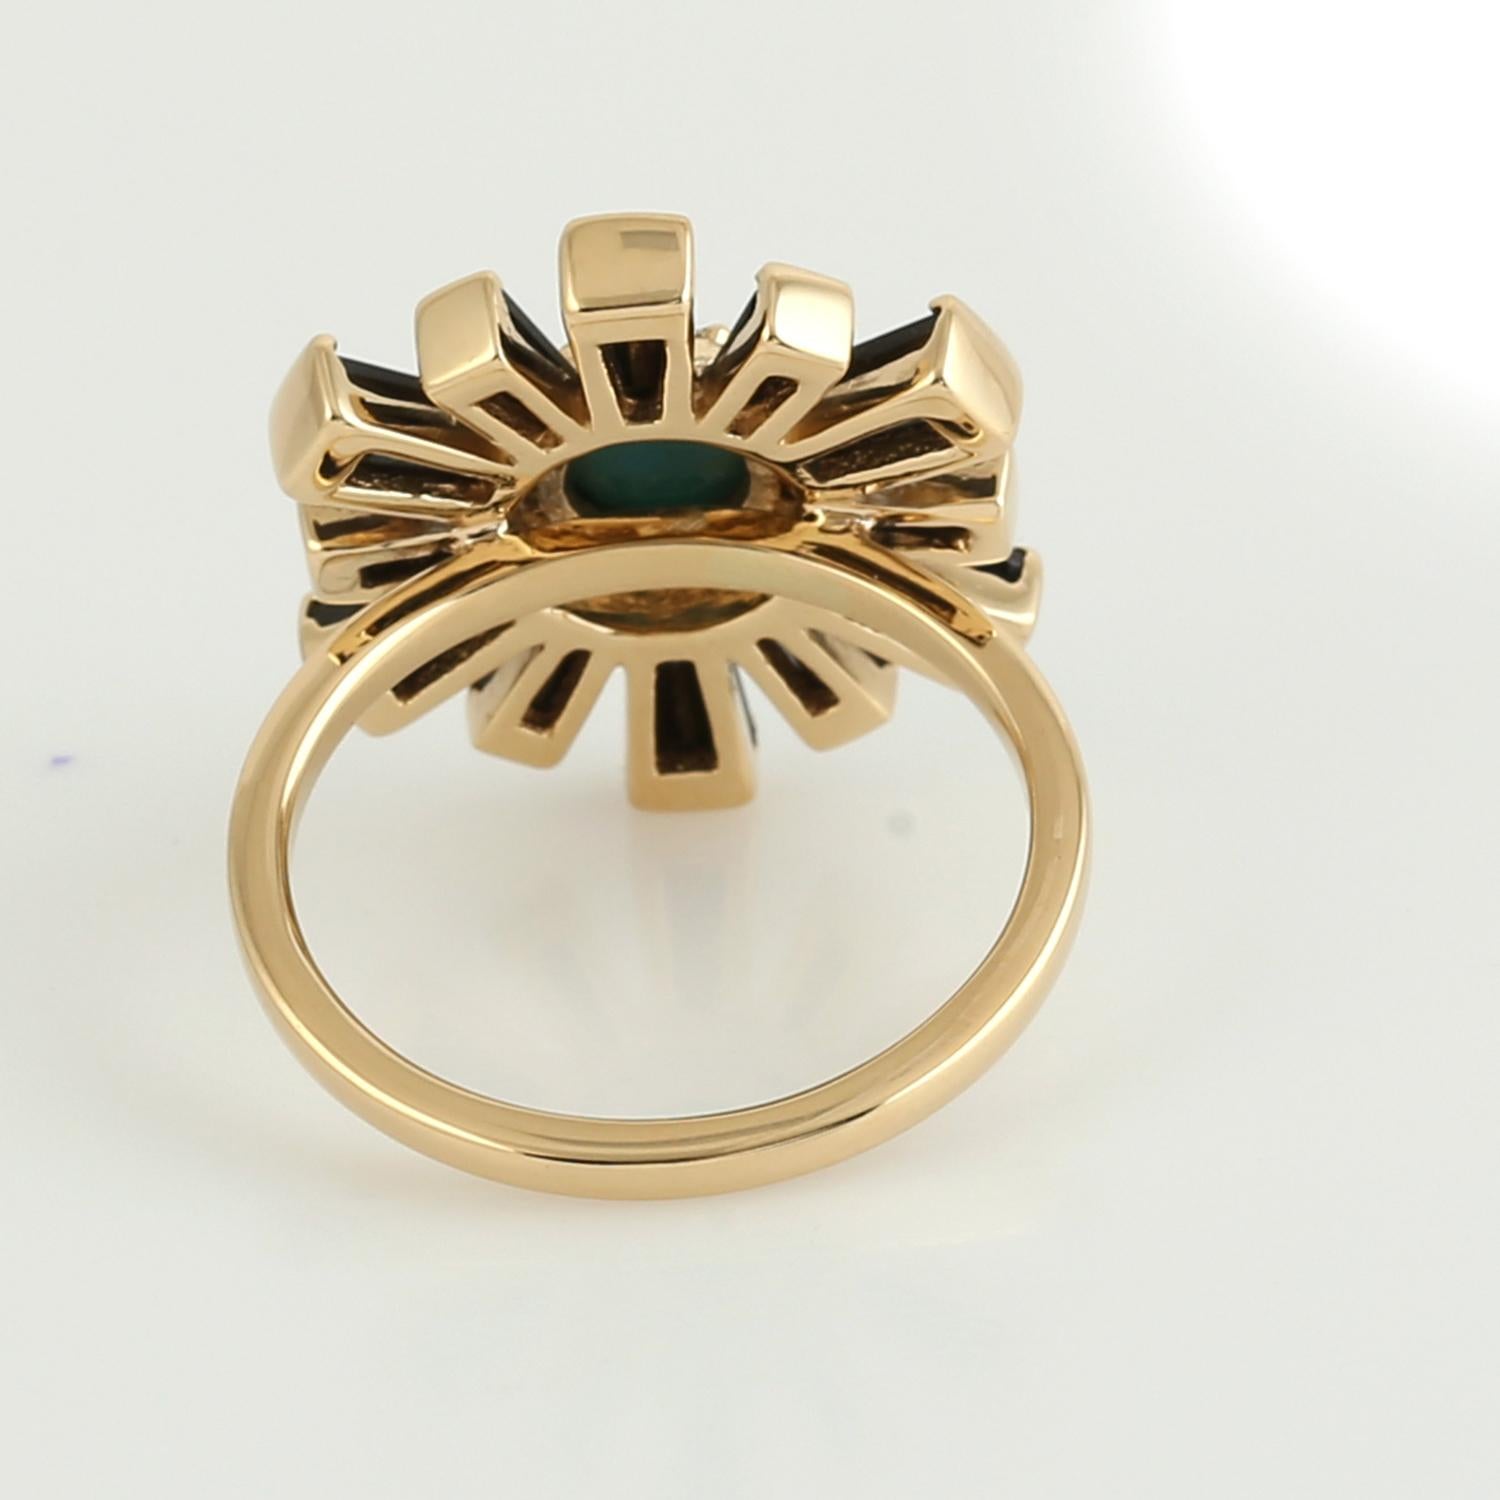 Mixed Cut Baguette Shaped Spinel Ring With Round Chrysoprase Made in 18K Yellow Gold For Sale